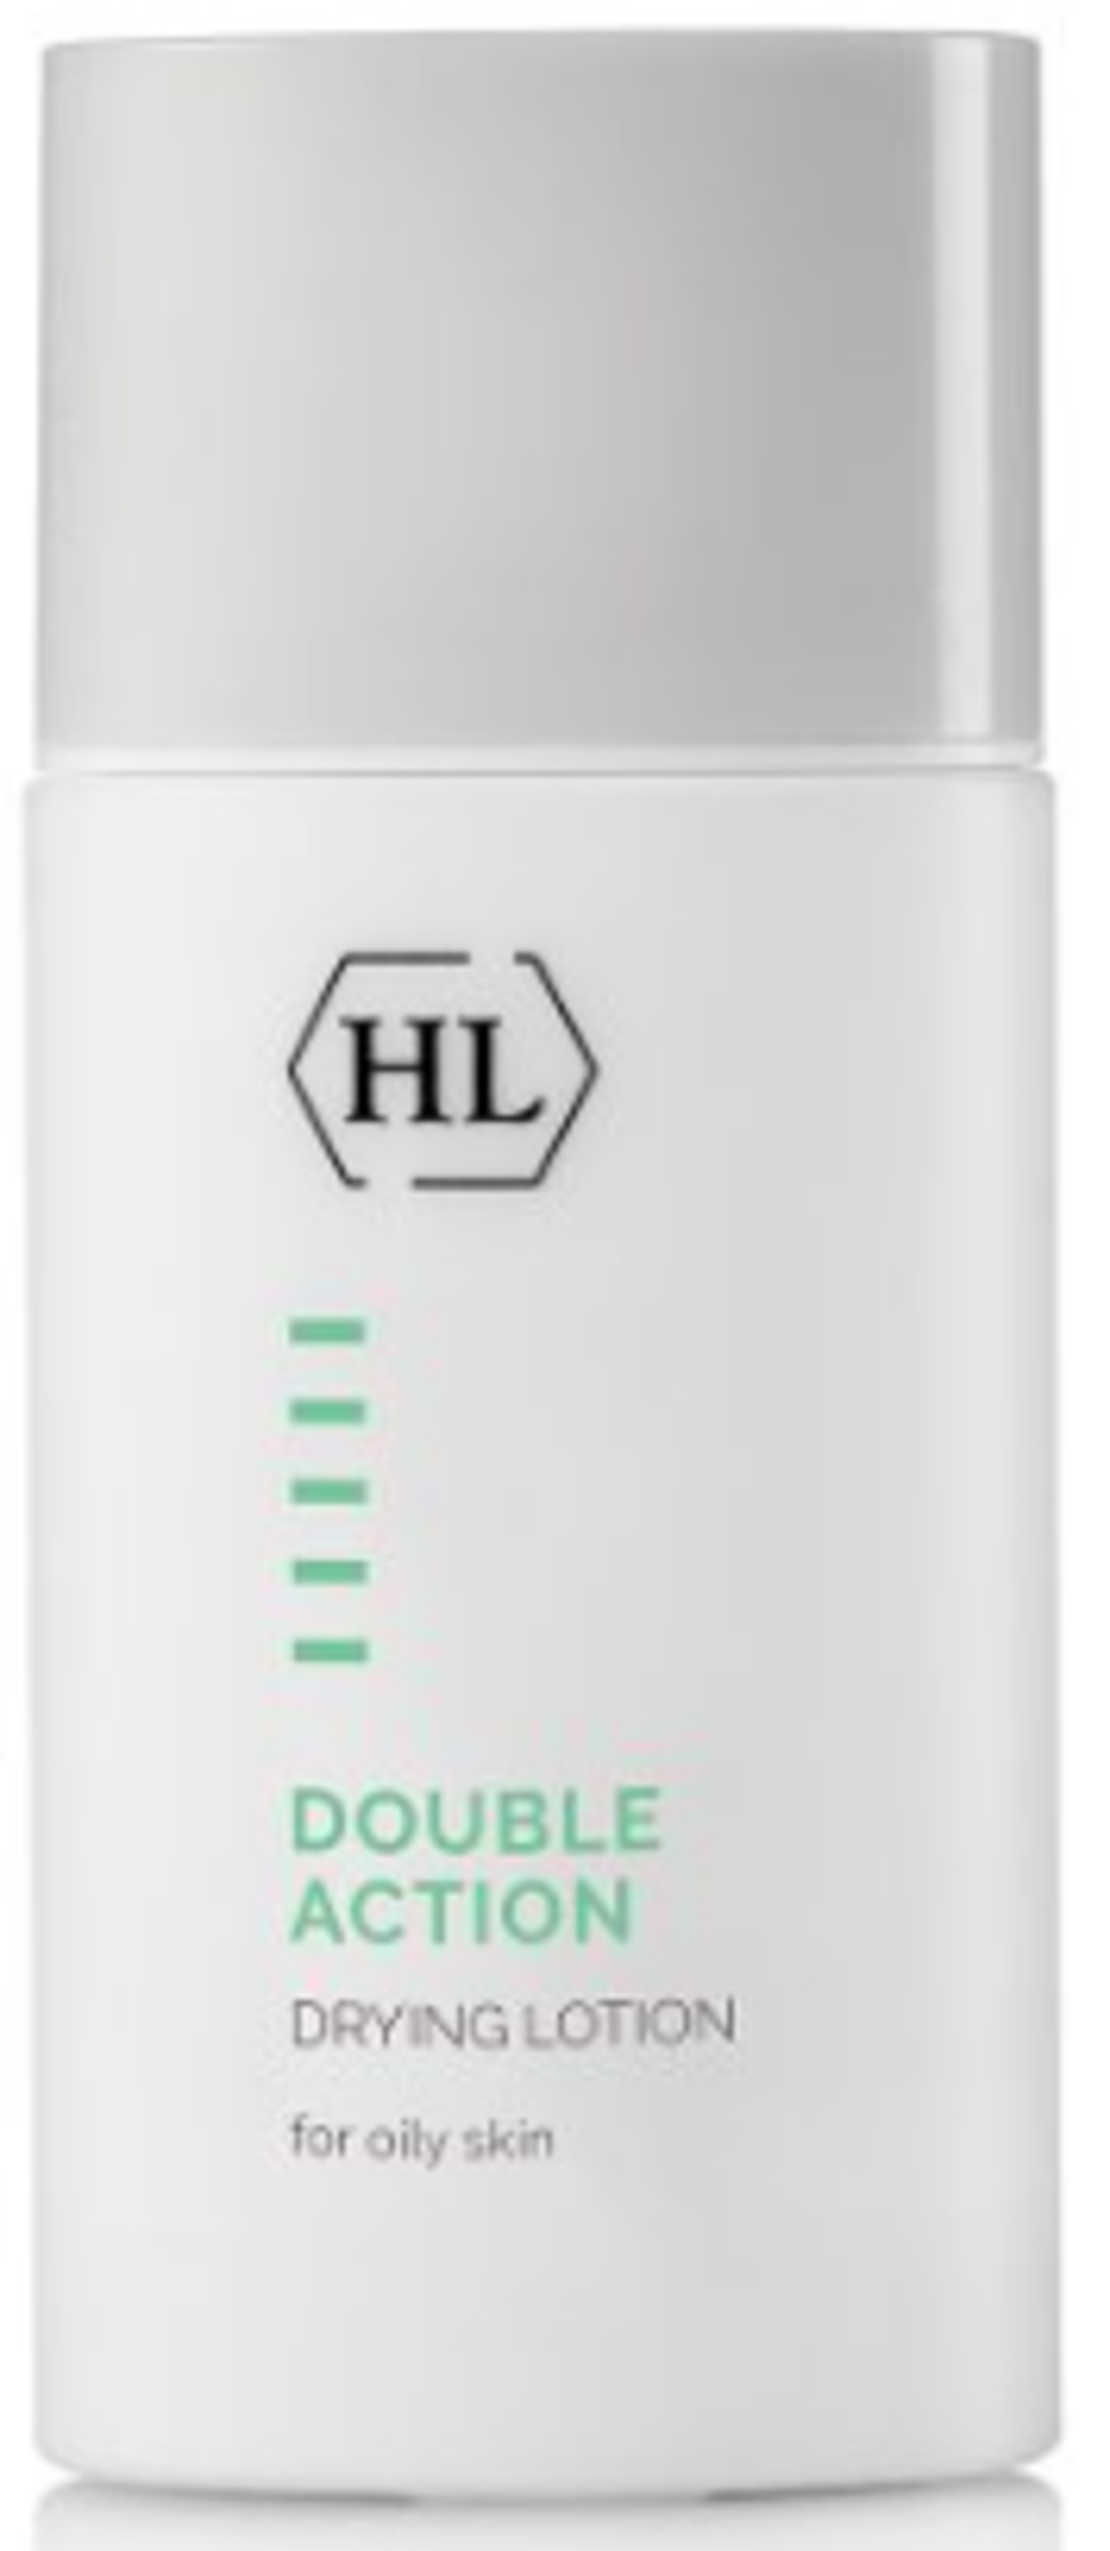 DOUBLE ACTION - DRYING LOTION